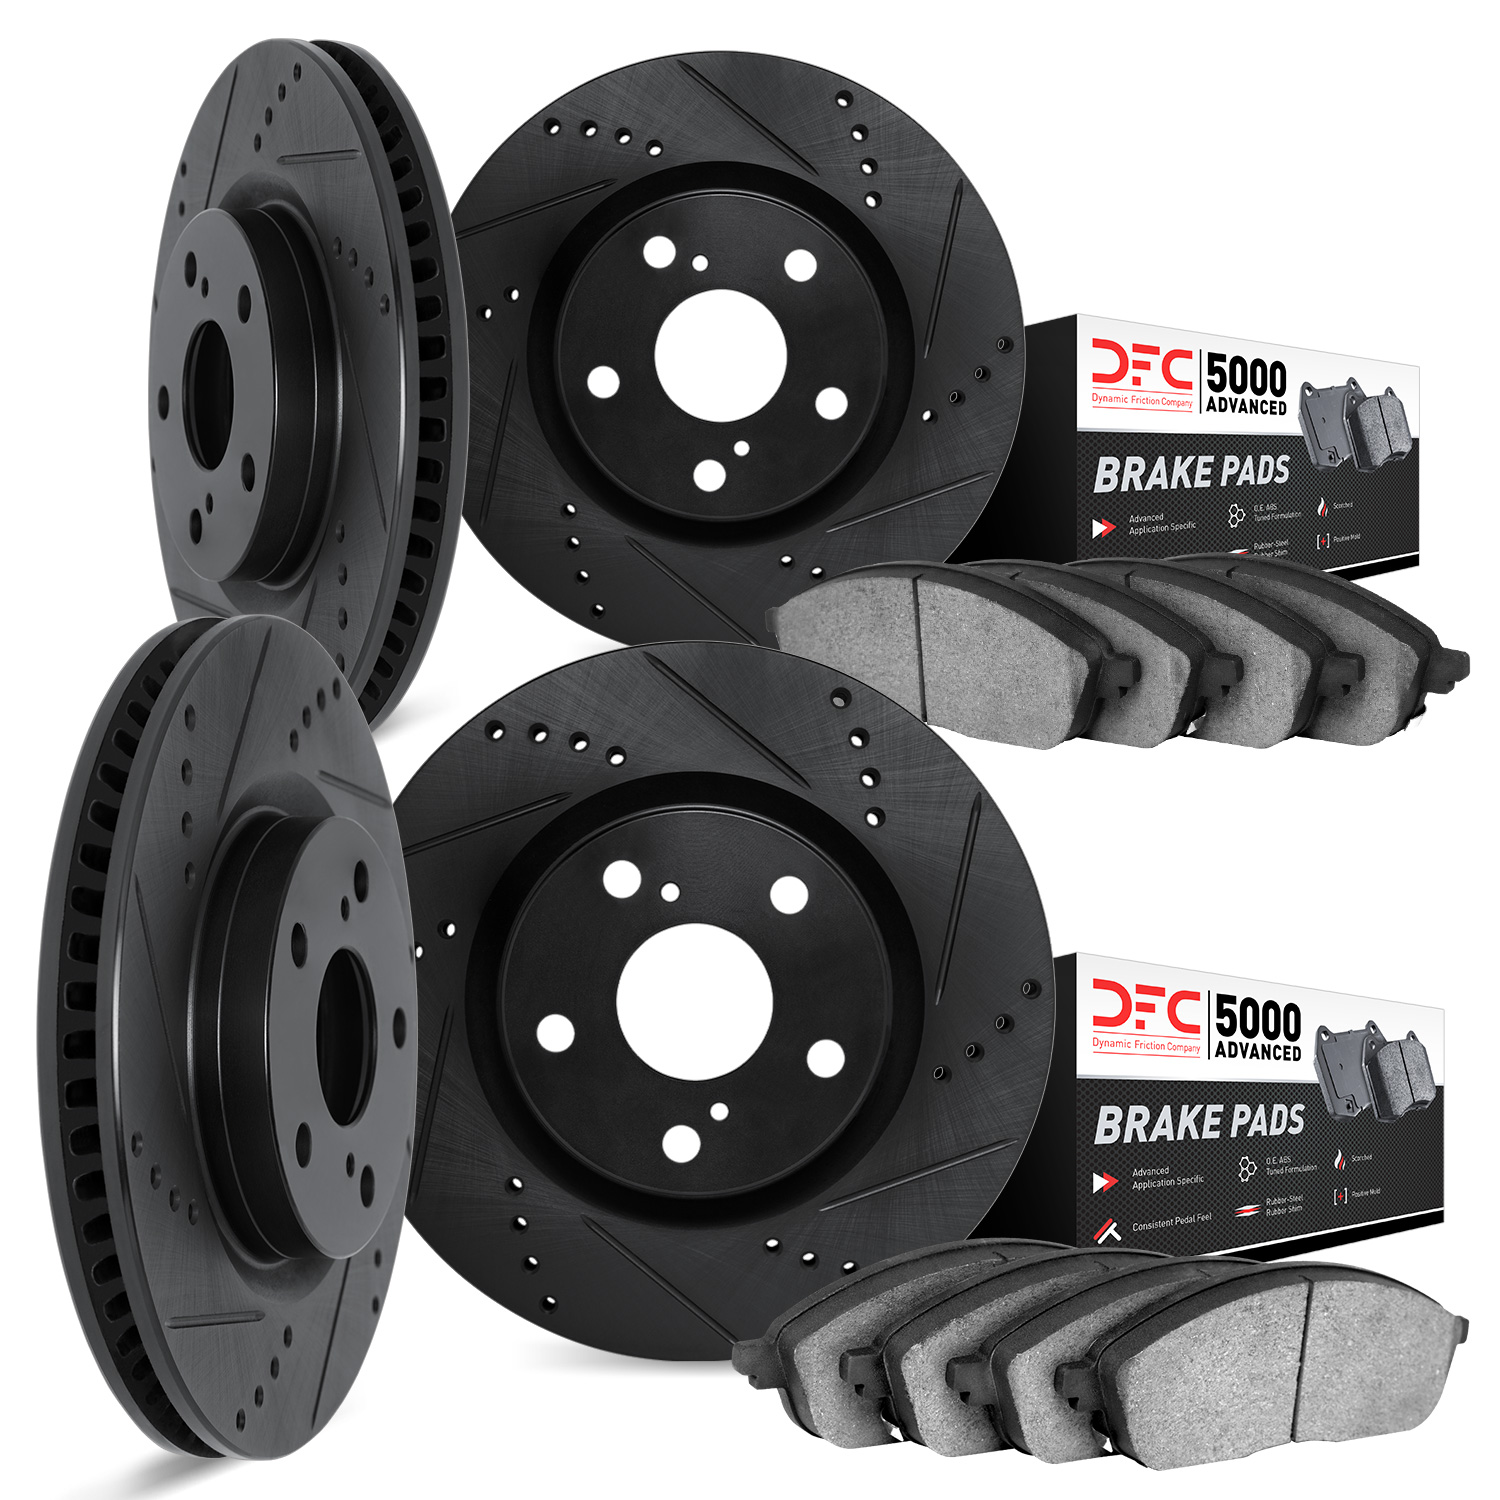 8504-31041 Drilled/Slotted Brake Rotors w/5000 Advanced Brake Pads Kit [Black], 2012-2016 BMW, Position: Front and Rear